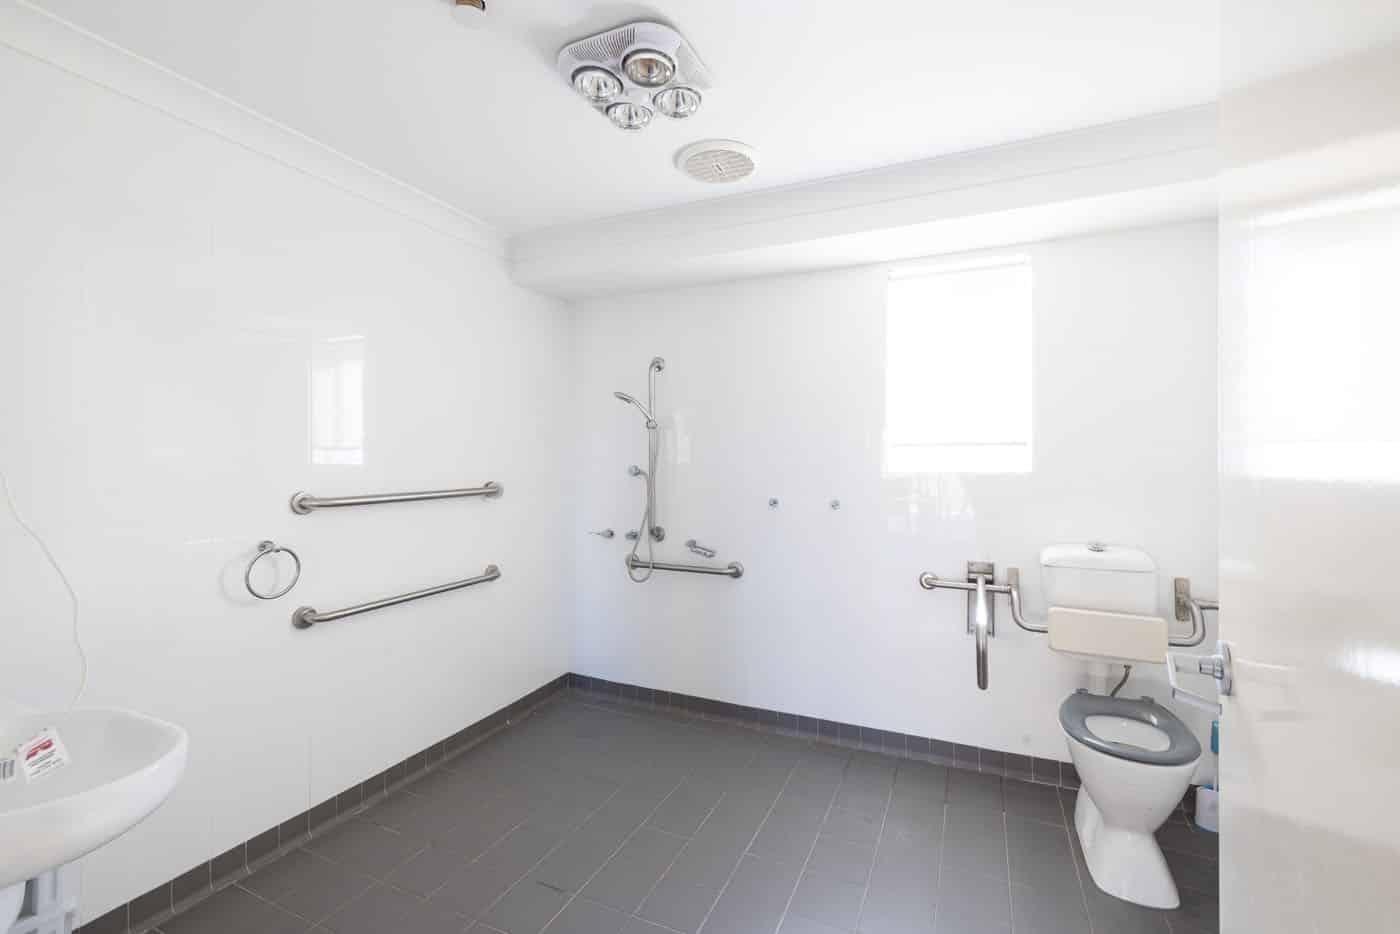 Large accessible bathroom with shower and toilet